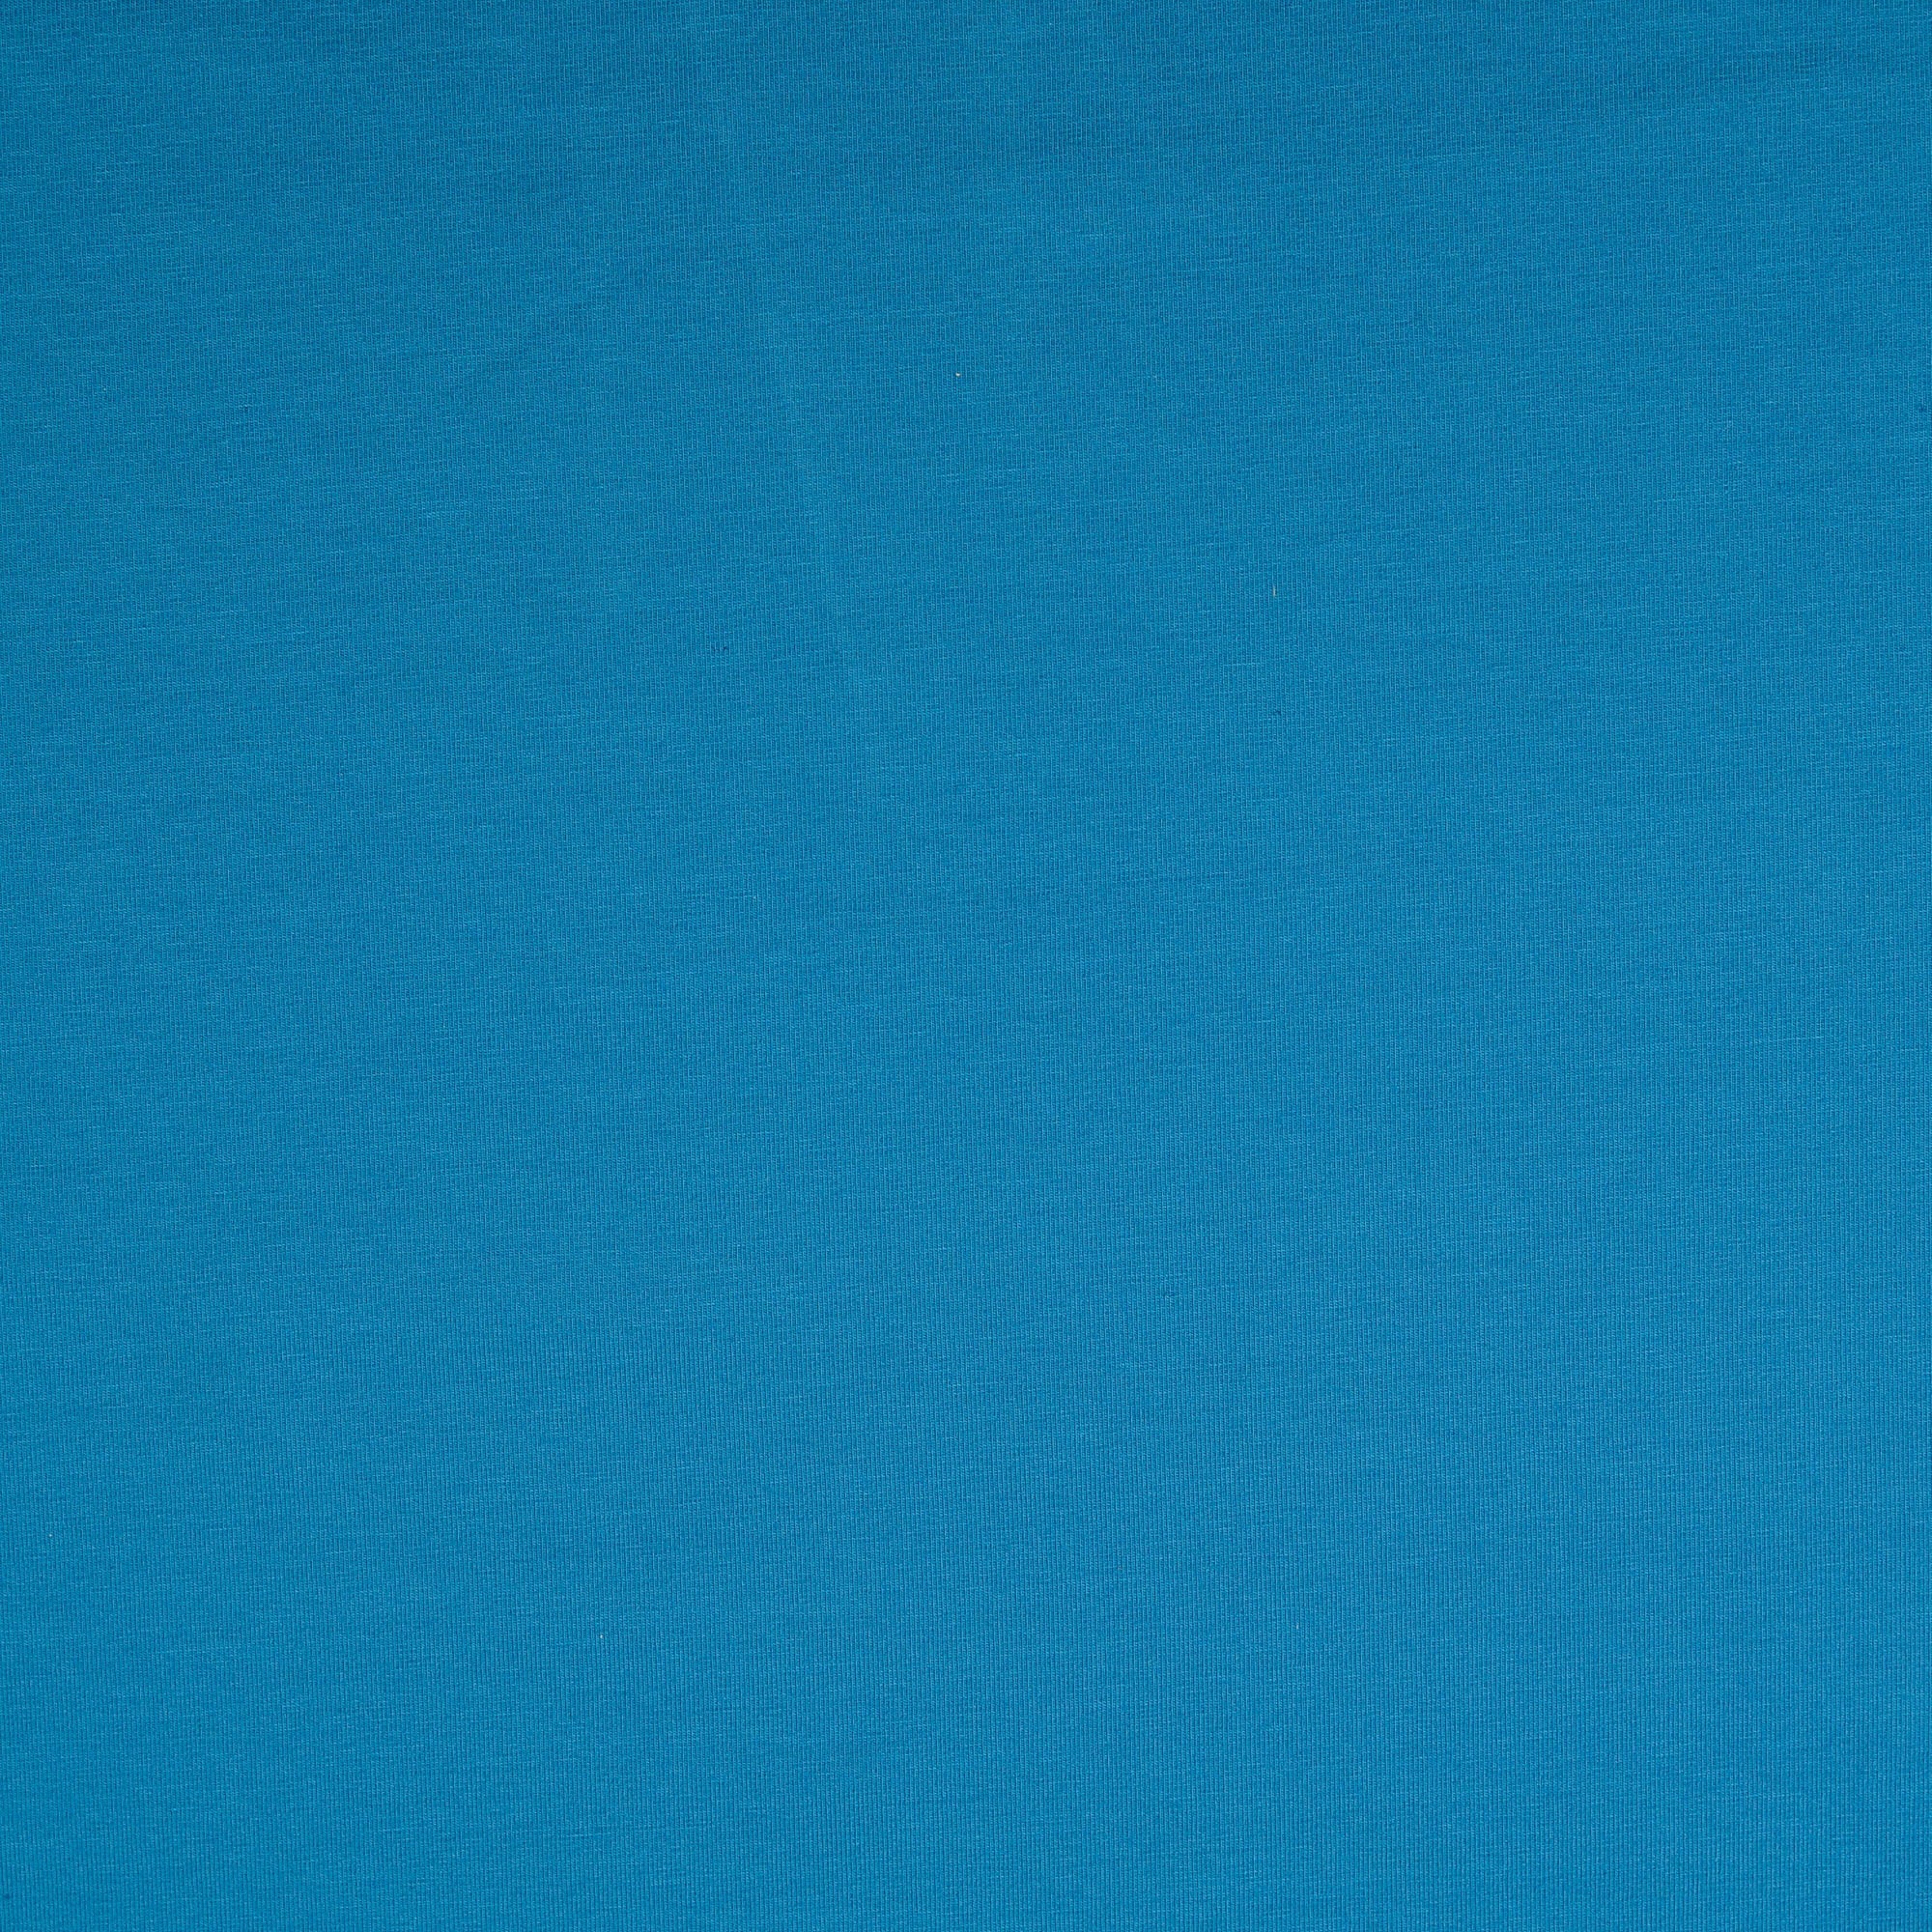 REMNANT 1.54 Metres - Essential Chic Ocean Blue Cotton Jersey Fabric